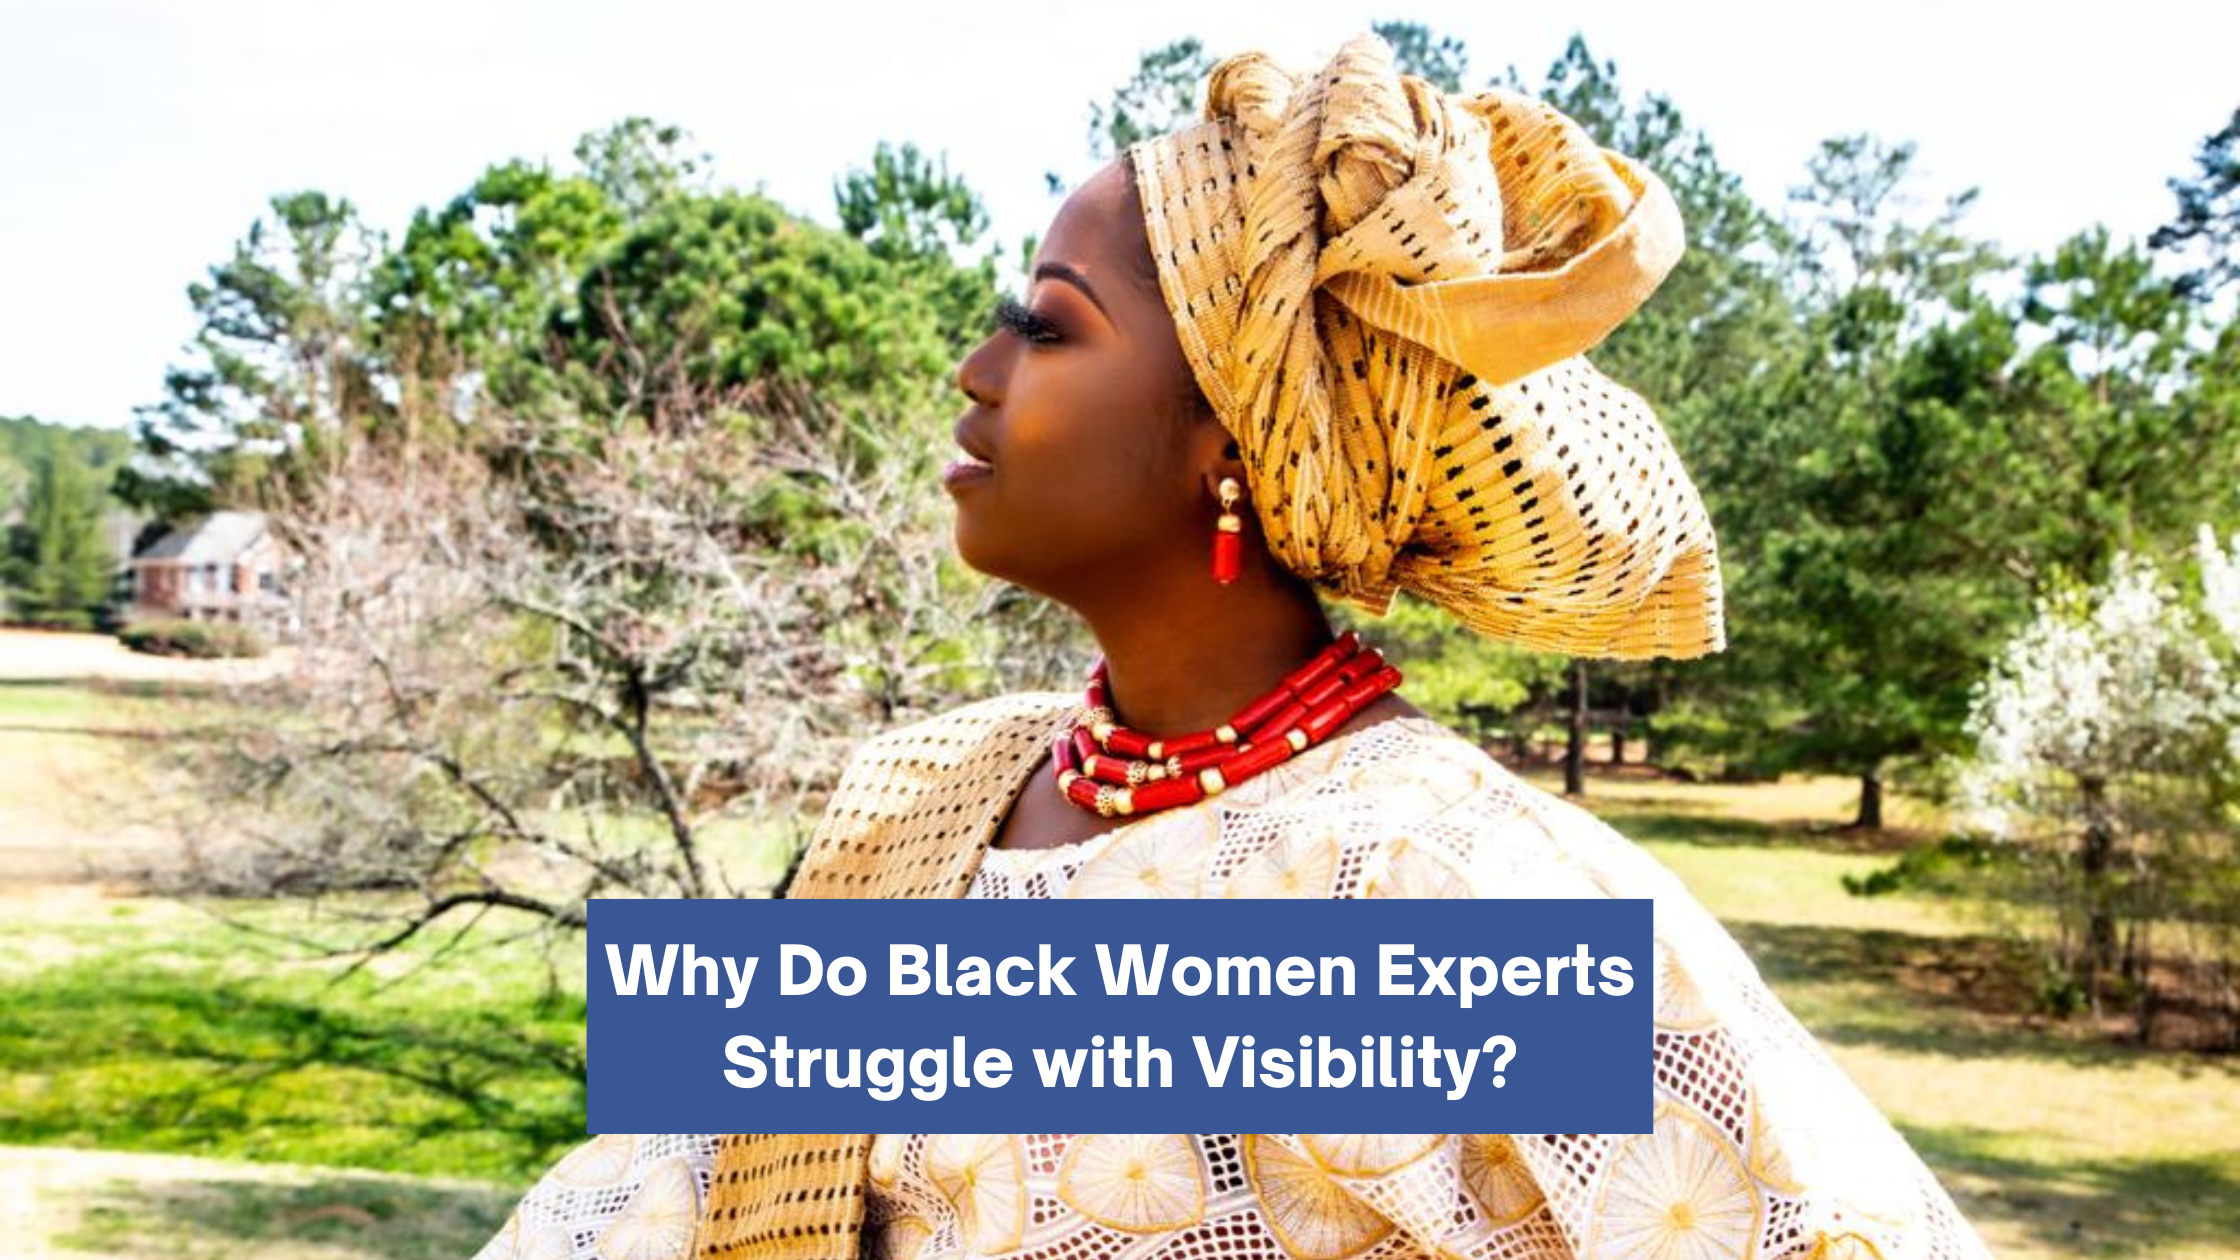 Why Do Black Women Experts Struggle with Visibility?